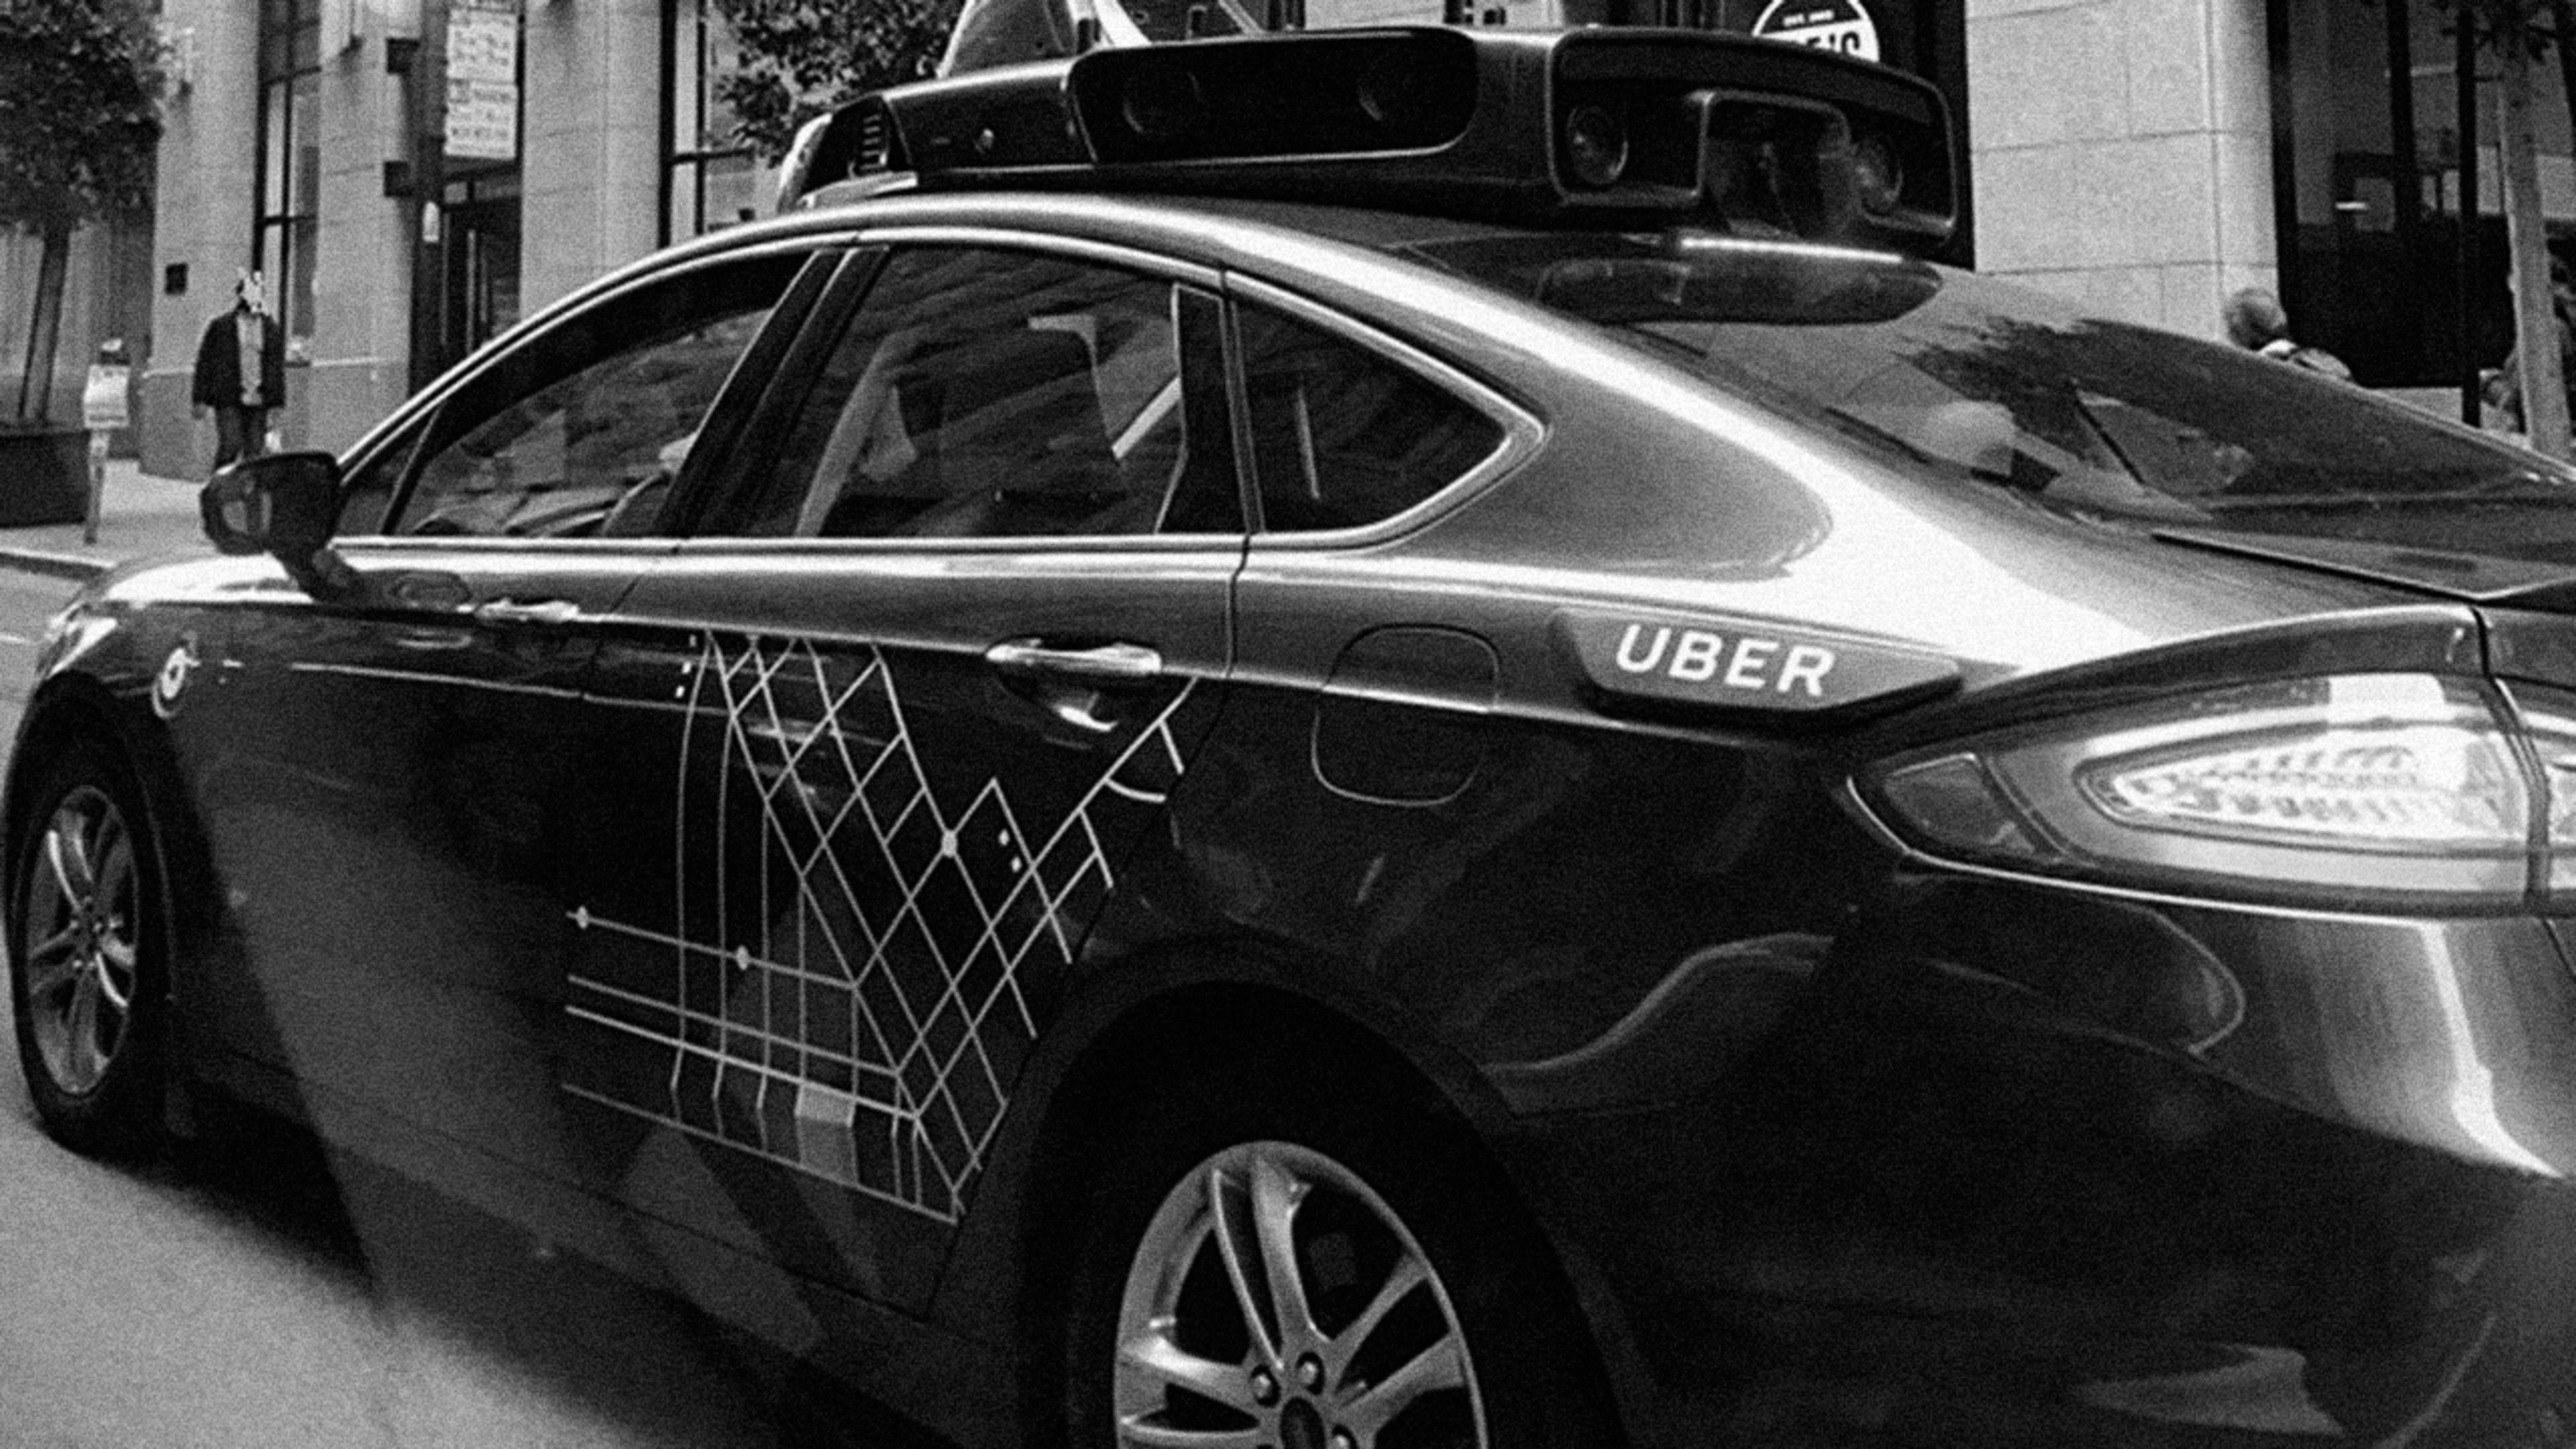 To woo Uber, a top Wall Street banker moonlighted as a driver